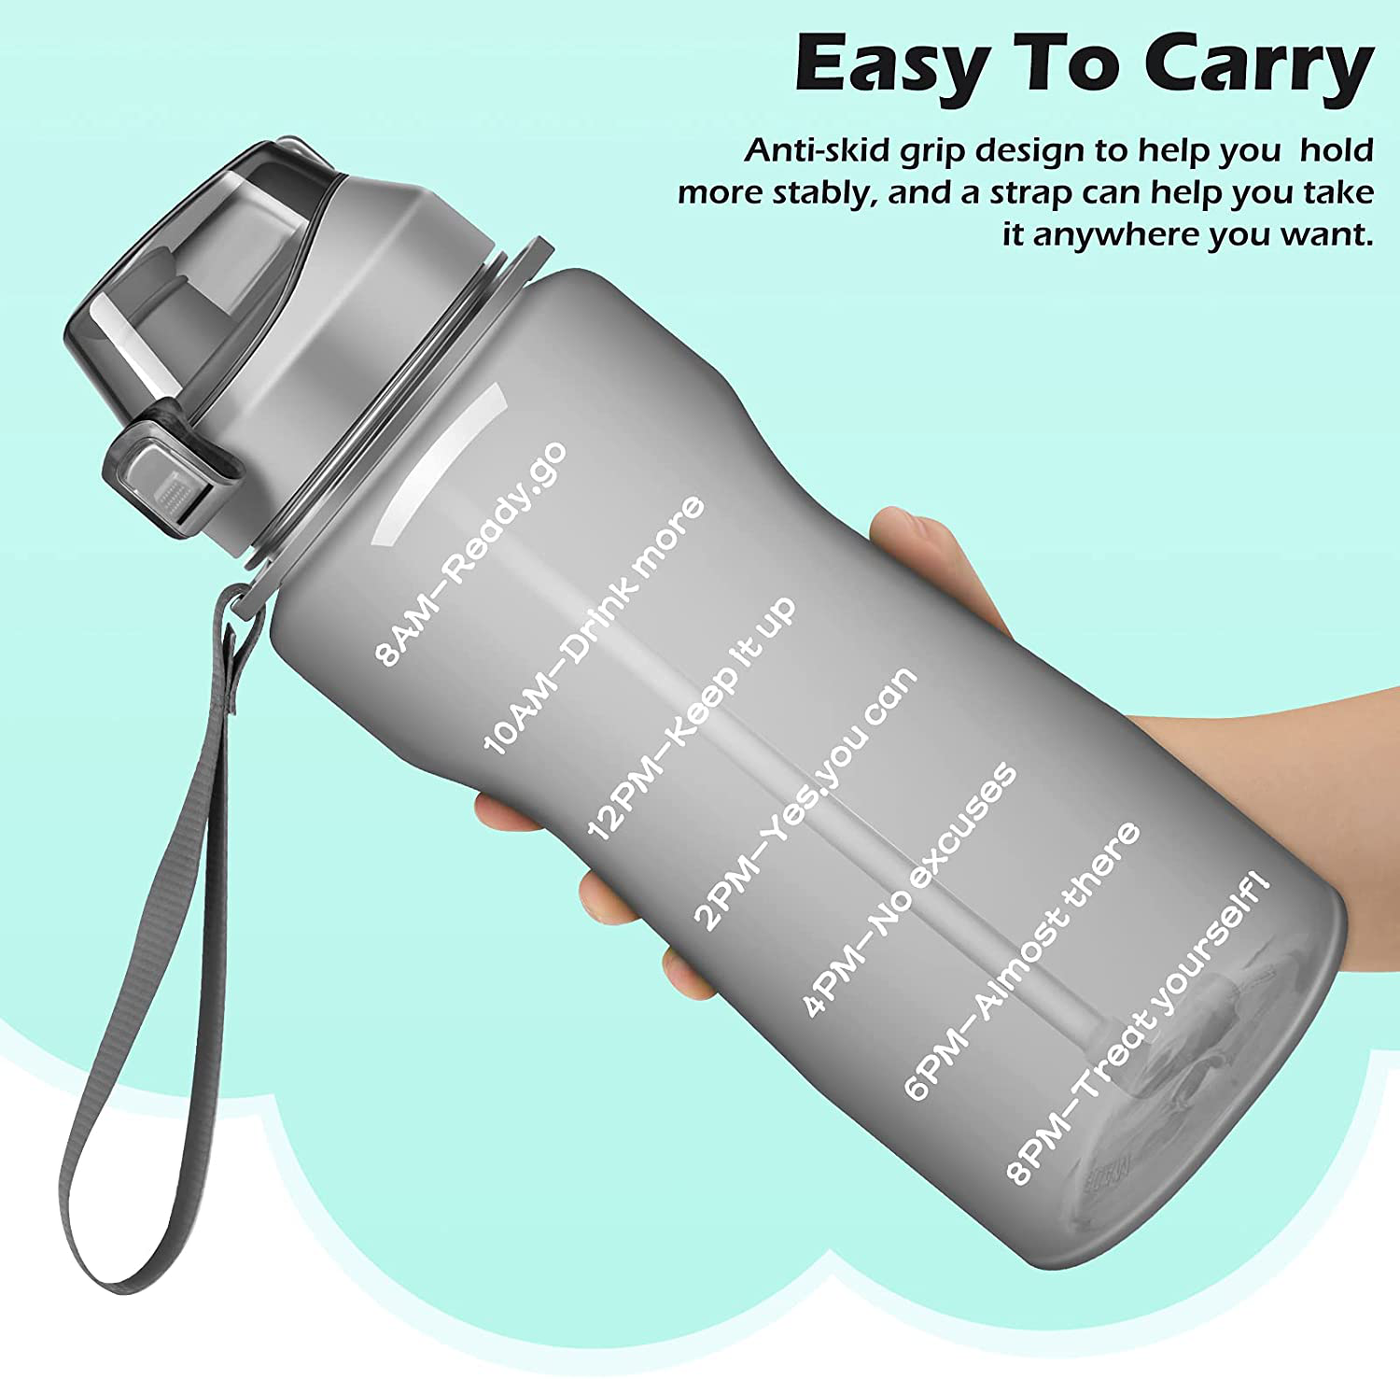 Ahape Gallon Motivational 64/100 oz Water Bottle with Time Marker & Straw, Large Daily Water Jug for Fitness Gym Outdoor Sports, Remind of All Day Hydration, Leak Proof, BPA Free (transparent, 100oz)